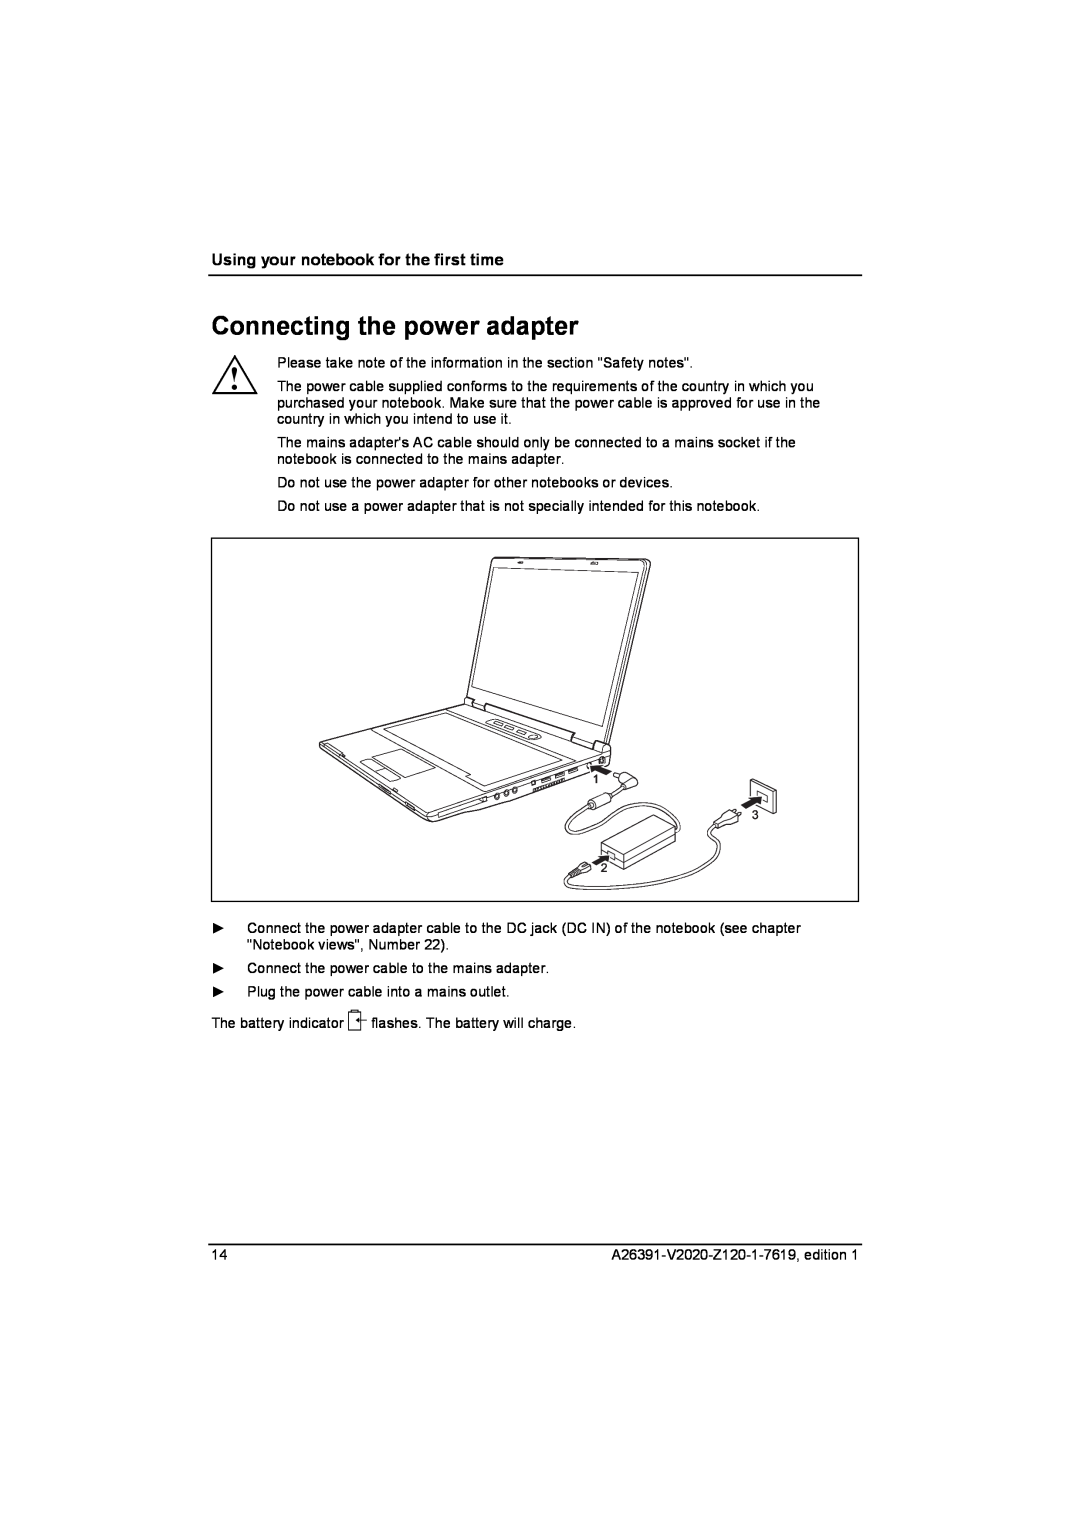 Fujitsu Siemens Computers V2020 manual Connecting the power adapter, Using your notebook for the first time 